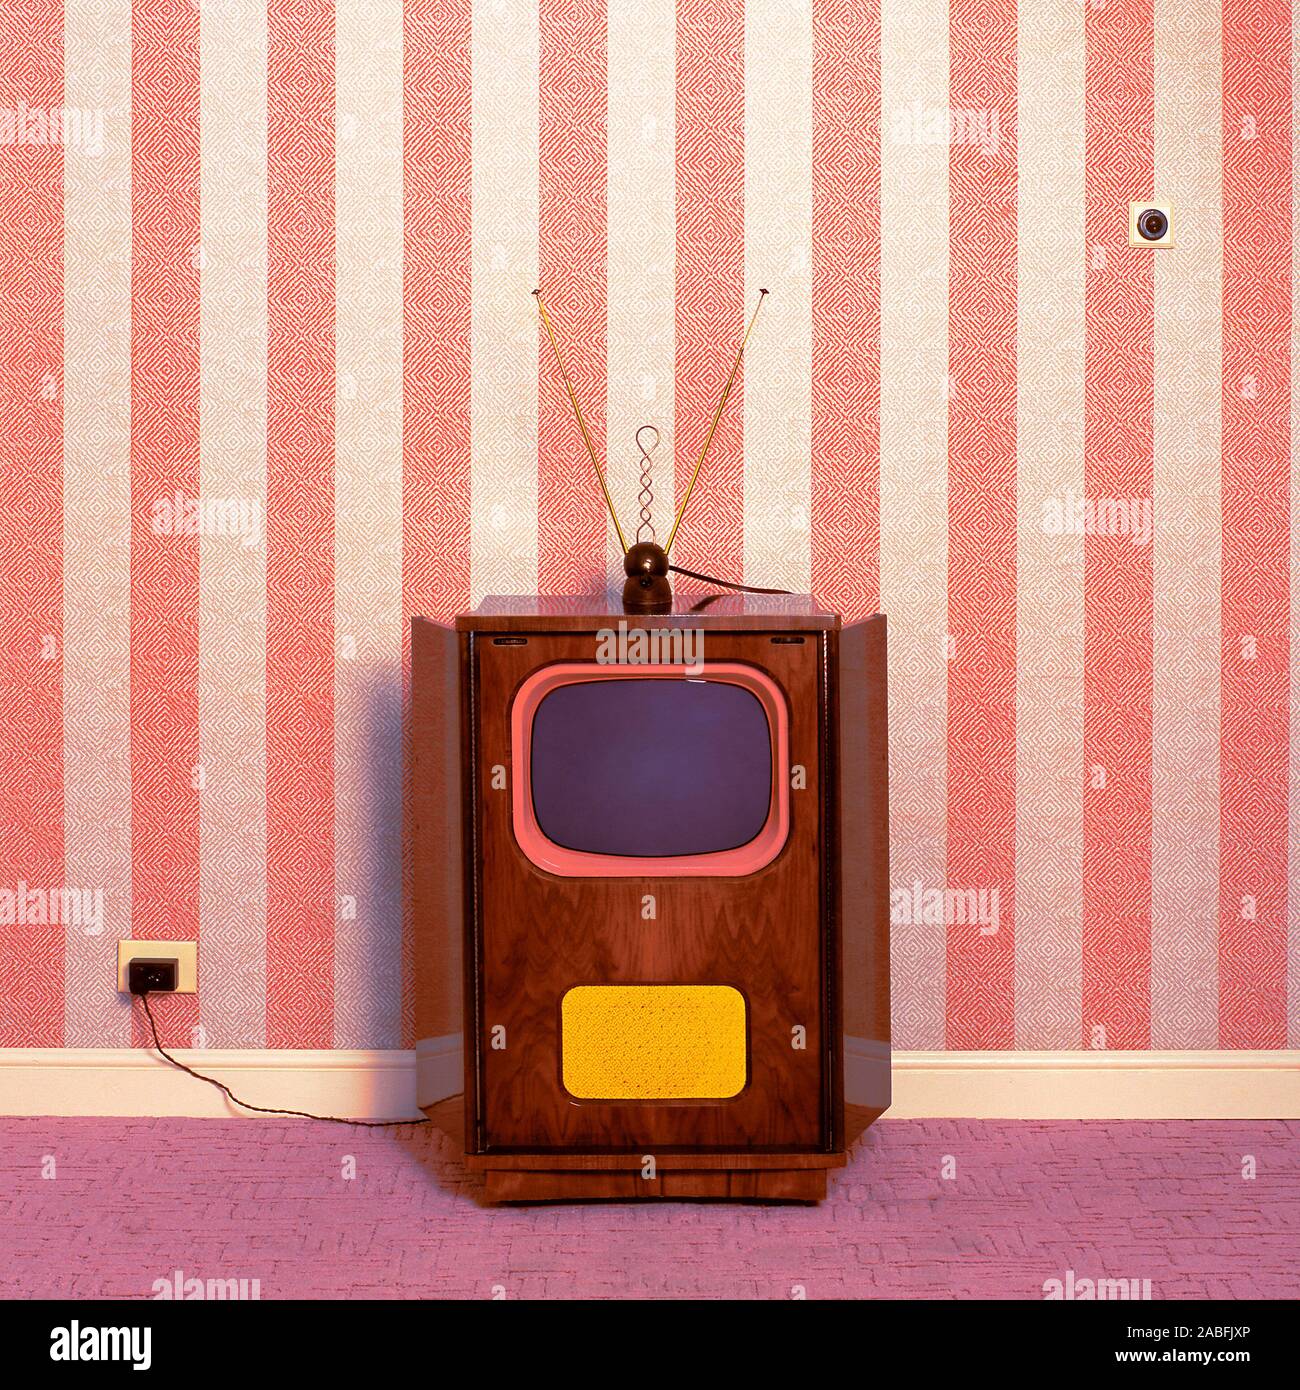 old television set Stock Photo